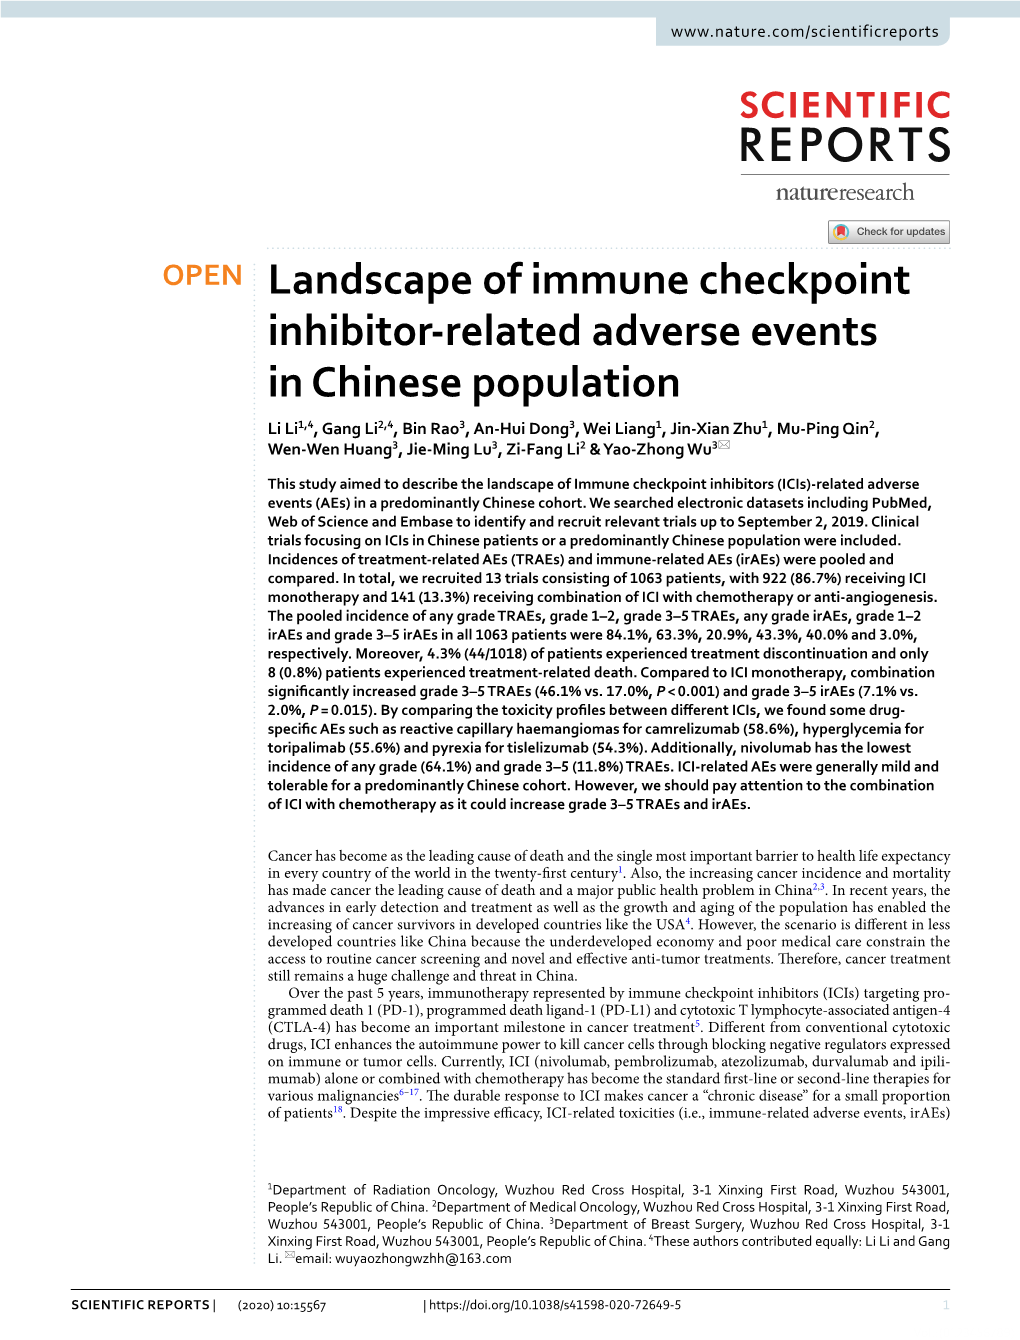 Landscape of Immune Checkpoint Inhibitor-Related Adverse Events In